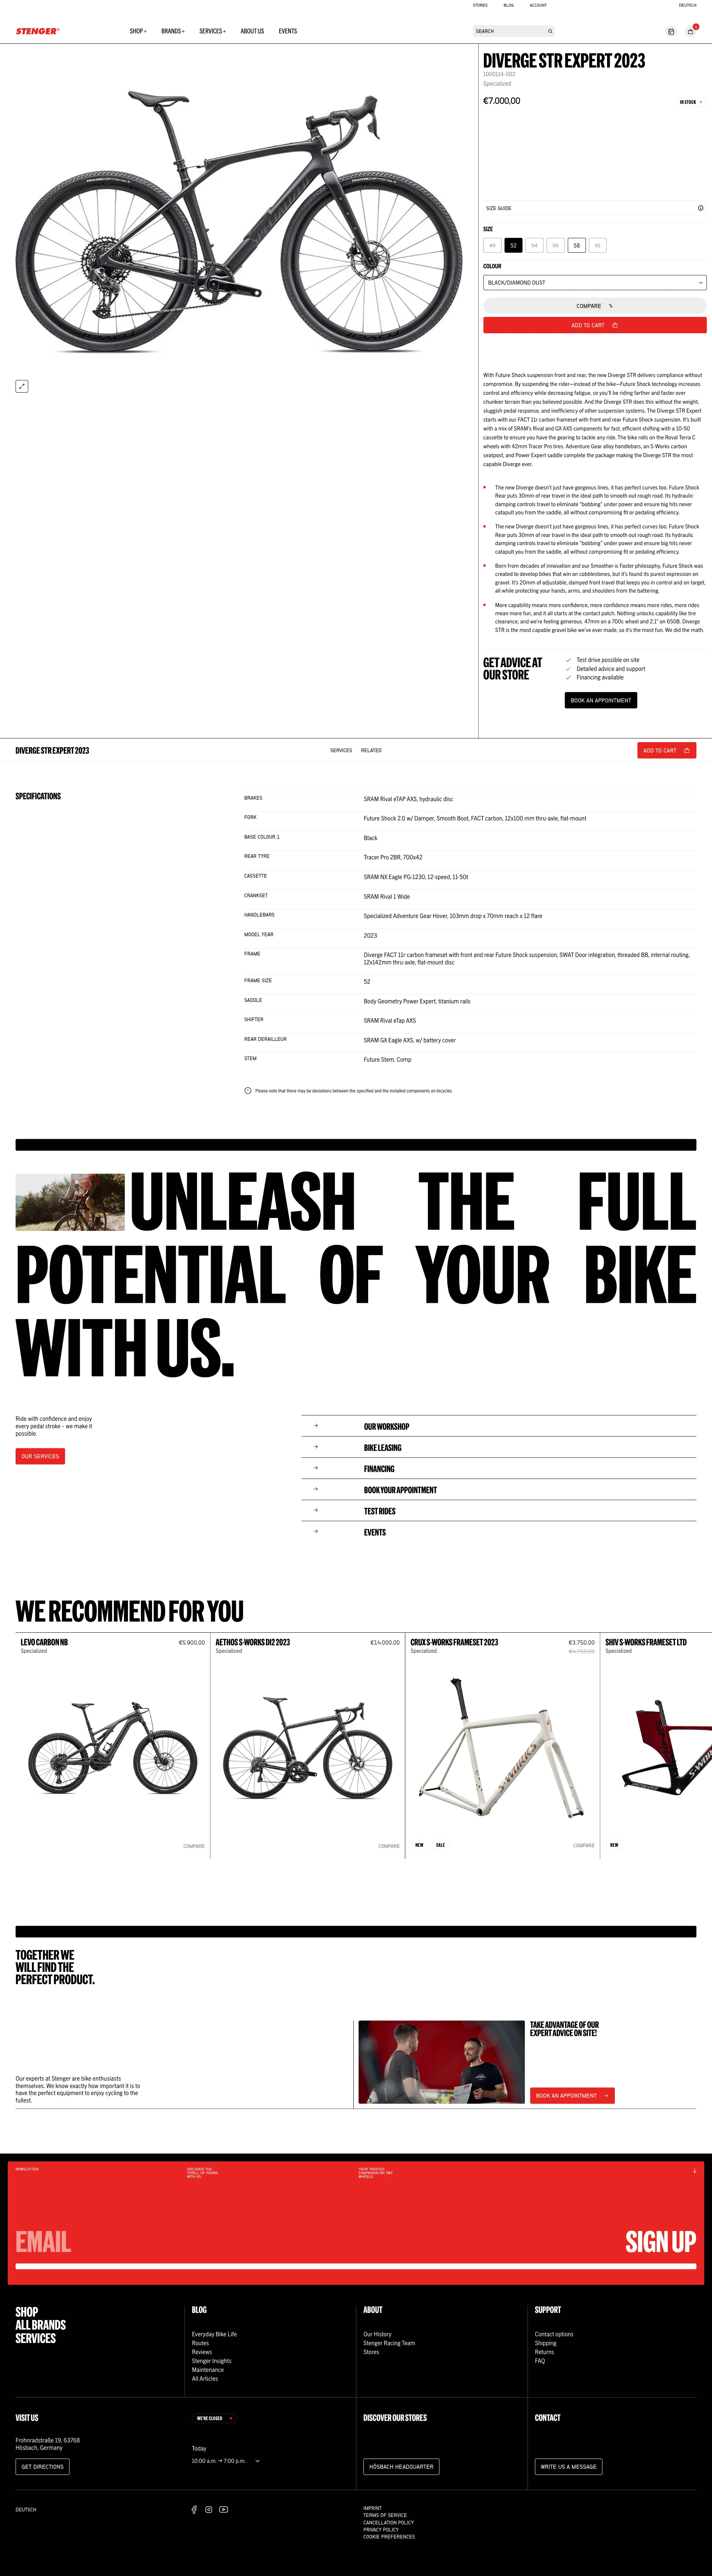 Stenger Bike Landing Page Example: Explore a world of cycling passion at Zweirad Stenger GmbH, where quality bikes and accessories meet enthusiasm on two wheels. Visit our online store for everything your biking heart desires, from the latest models to trusted tools and gear. Kickstart your cycling journey with us!